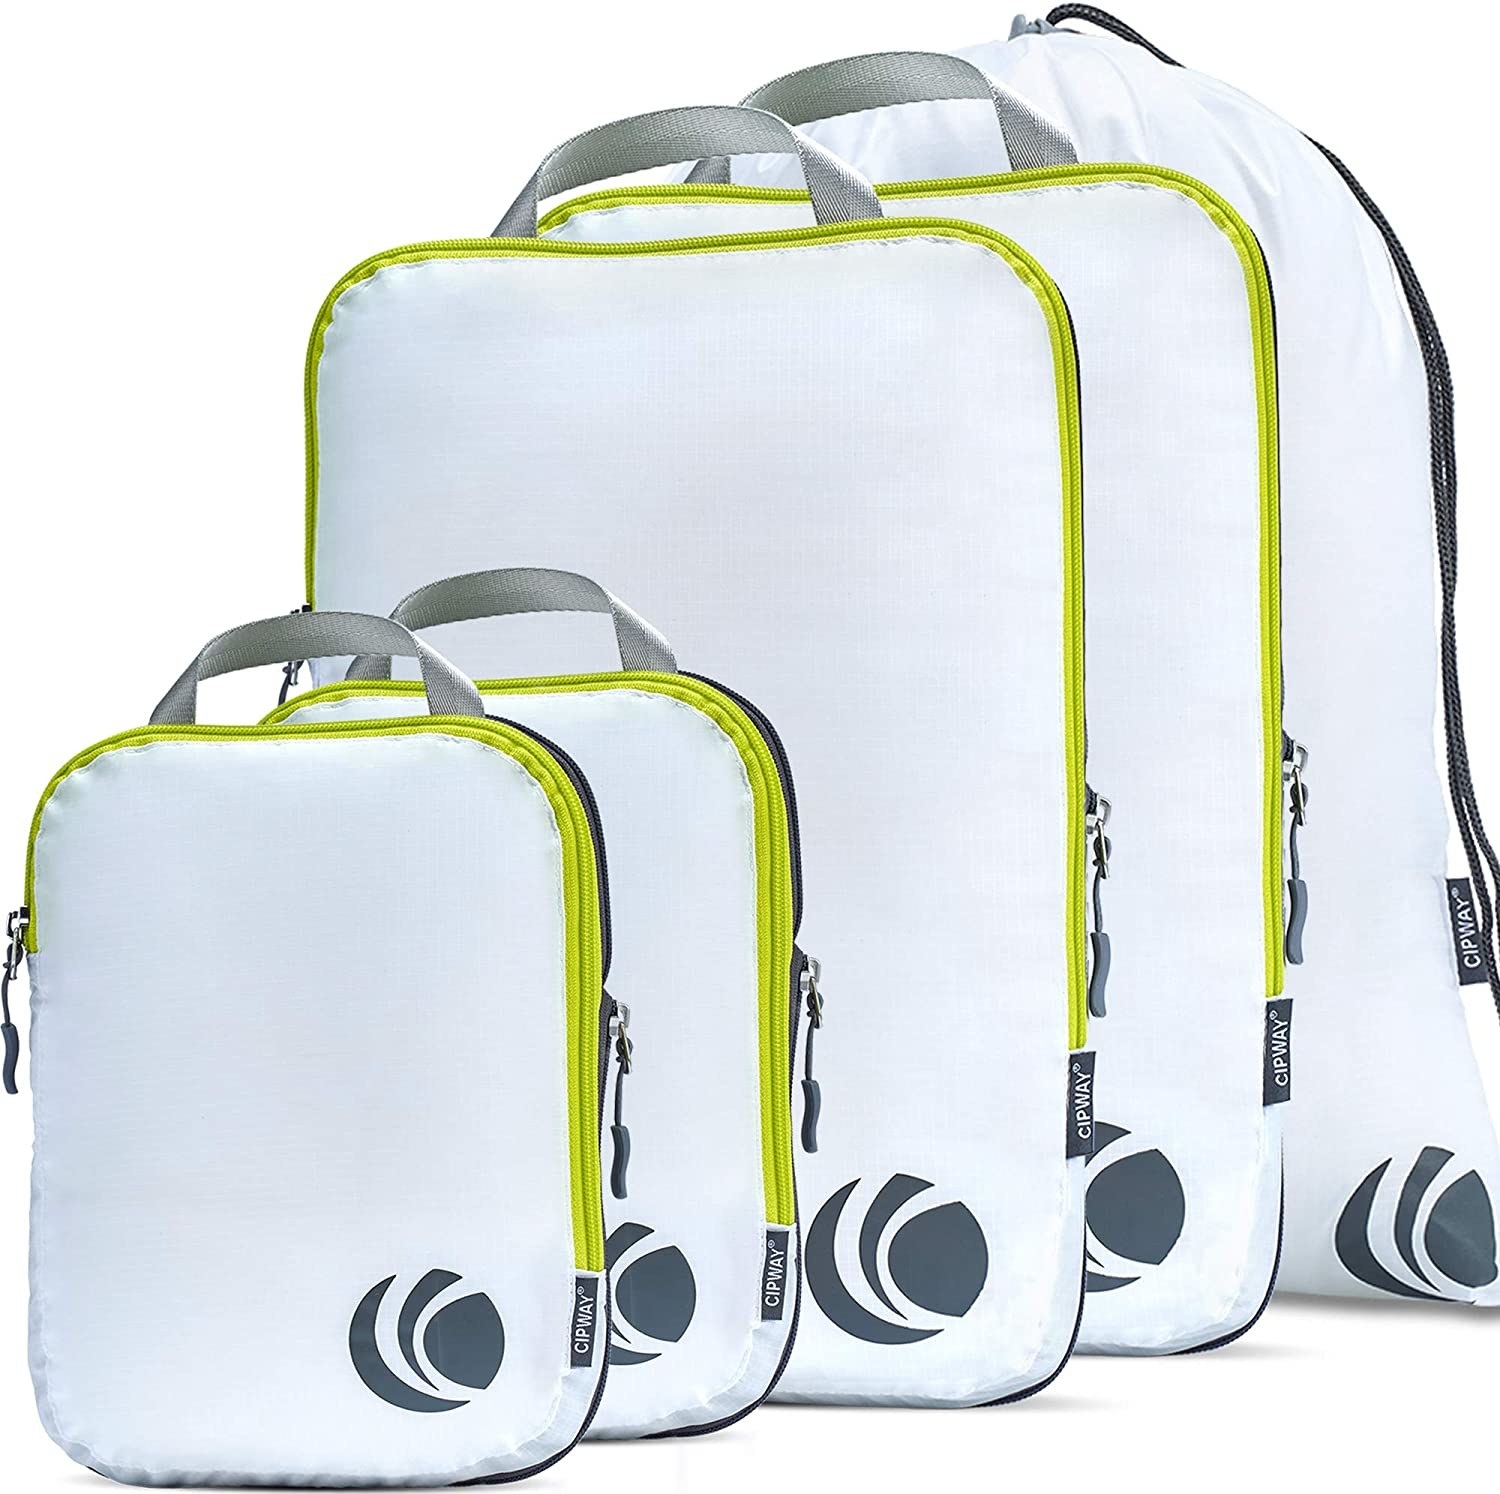 five compression bags on a white background